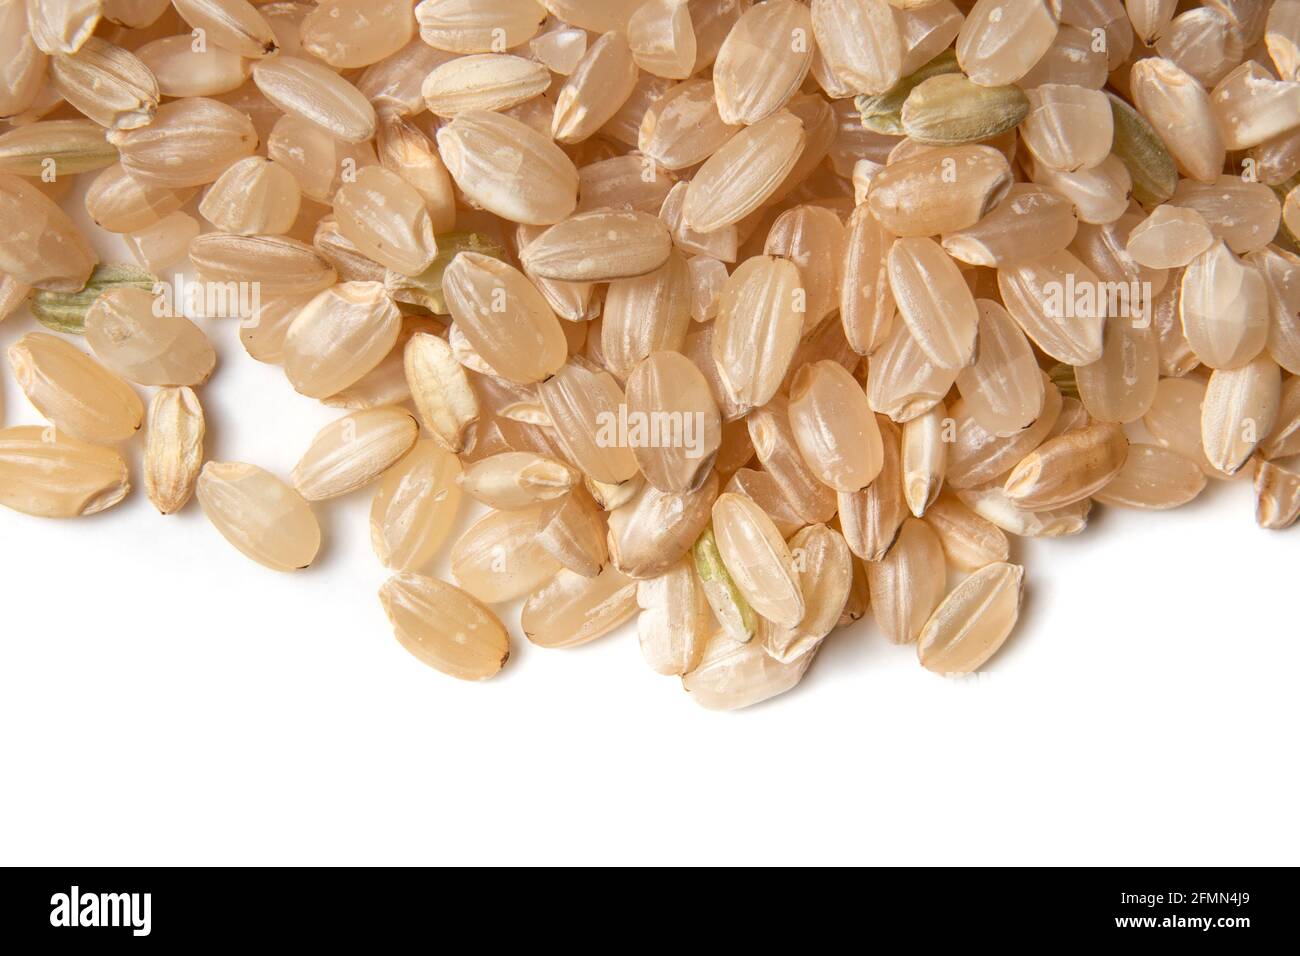 Brown short grain rice, macro. Top view of many dry uncooked rice grains. Used for rice recipes with creamy texture, such as risotto, rice pudding or Stock Photo